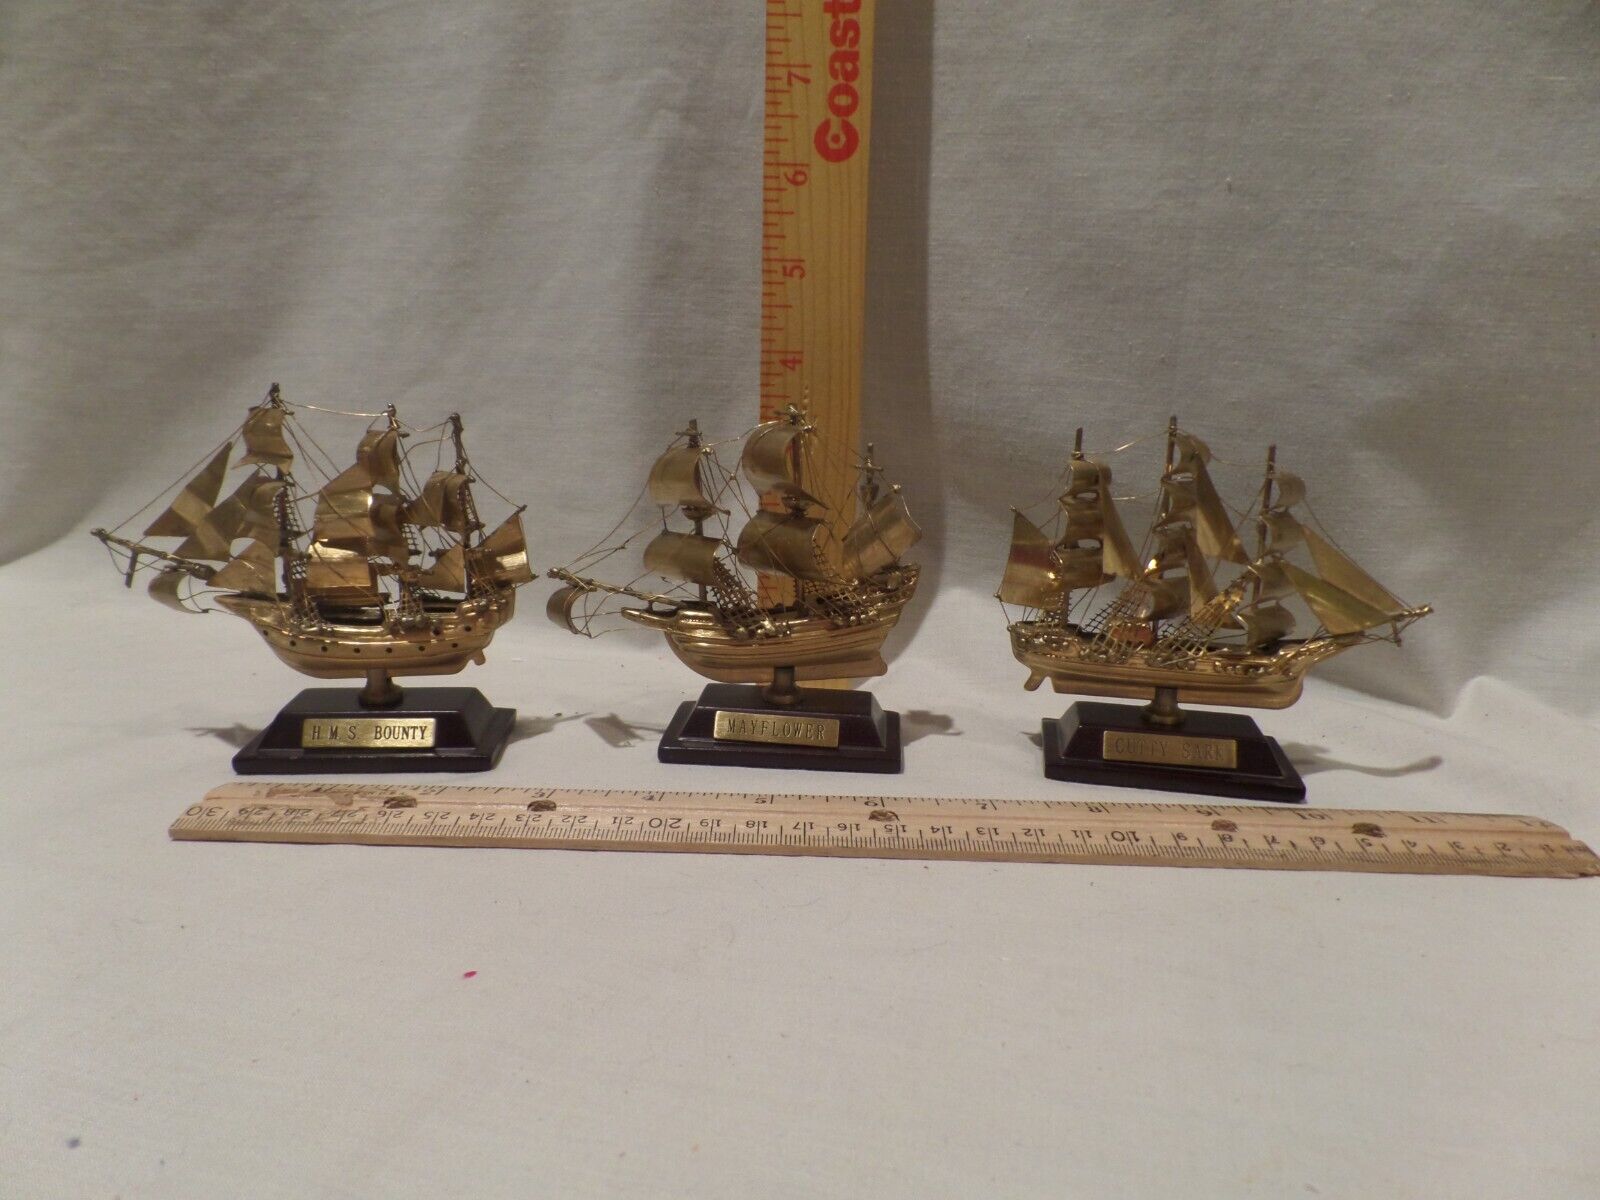 VINTAGE LOT OF 3 SMALL FAMOUS - METAL SAILBOATS WITH DISPLAYS-GOLD TONE